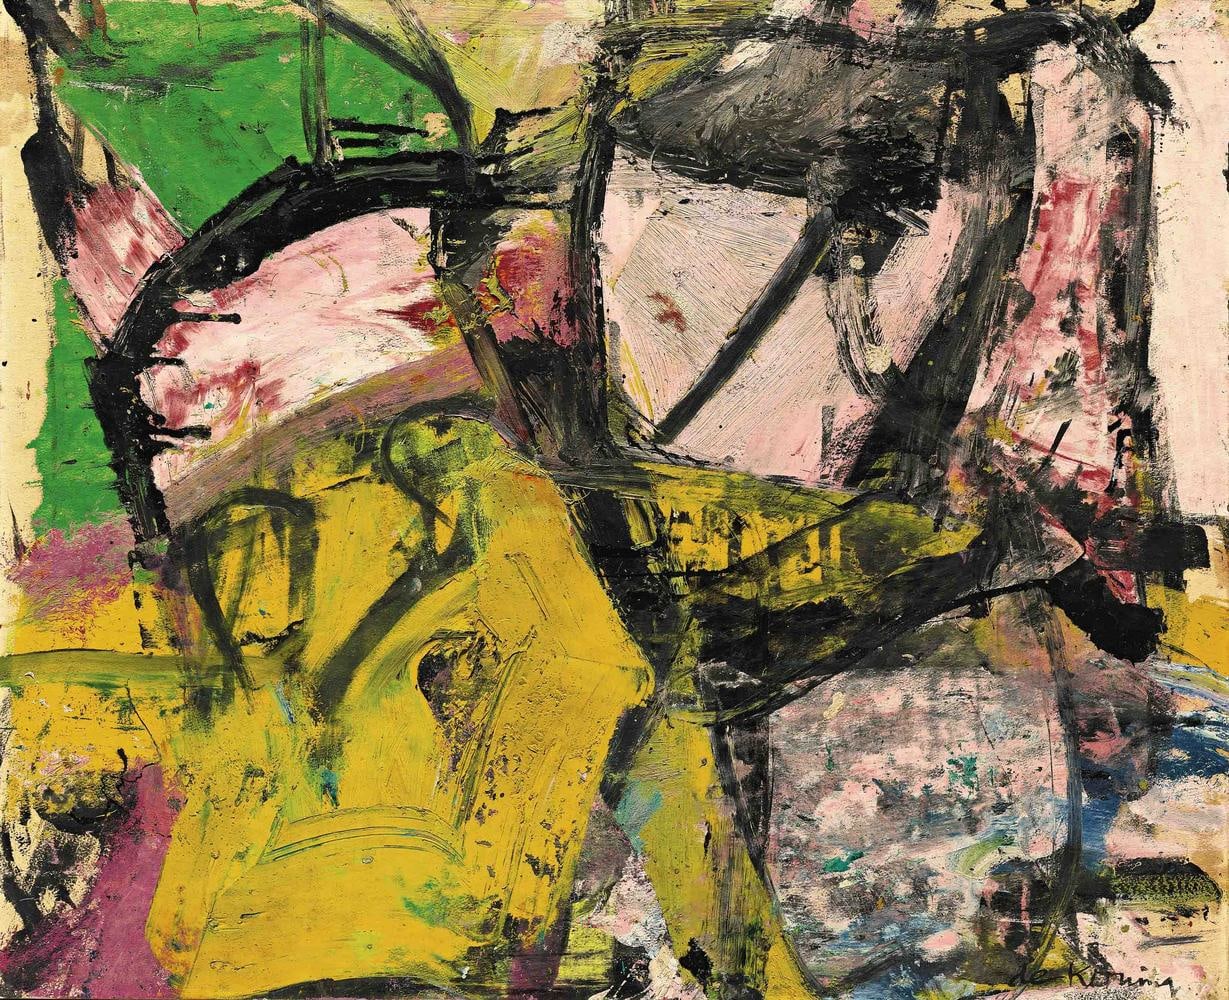 Willem de Kooning

Sagamore

1955

oil, enamel and charcoal on paper mounted on board

22 1/2 x 28 inches (57.2 x 71.1 cm)&amp;nbsp;

Private Collection&amp;nbsp;